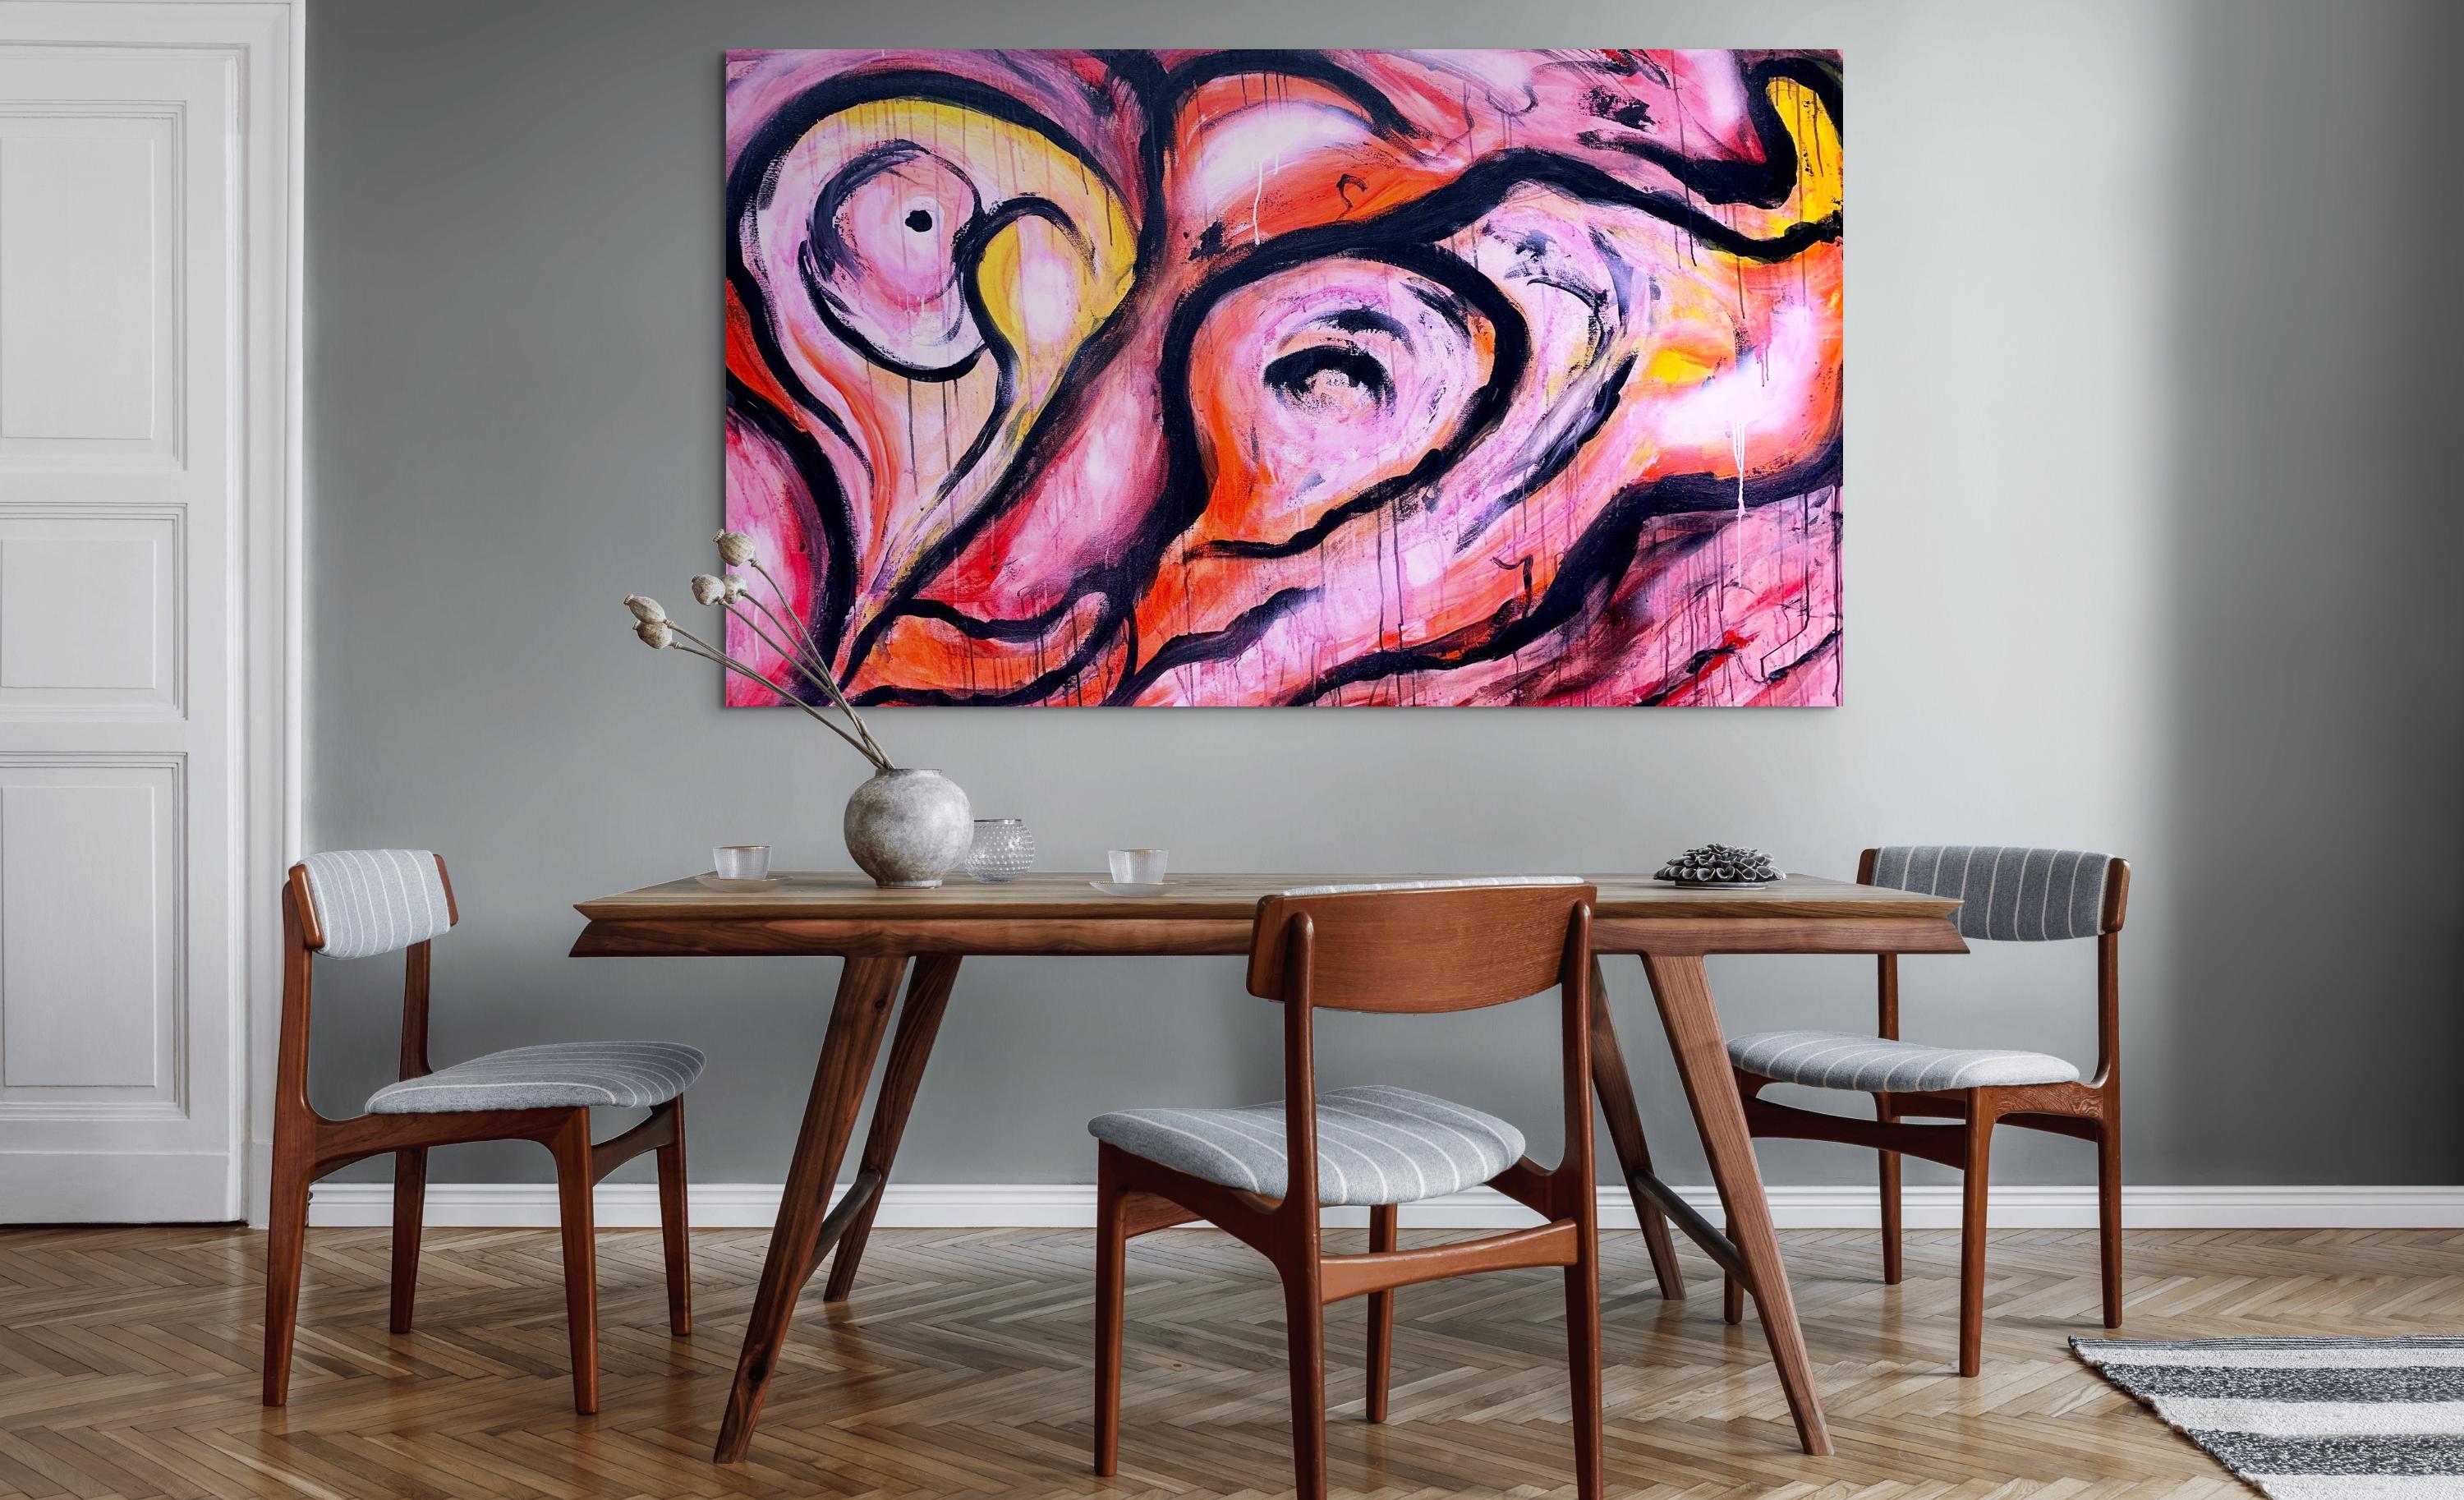 Changeling - Abstract Expressionist Painting by Estelle Asmodelle